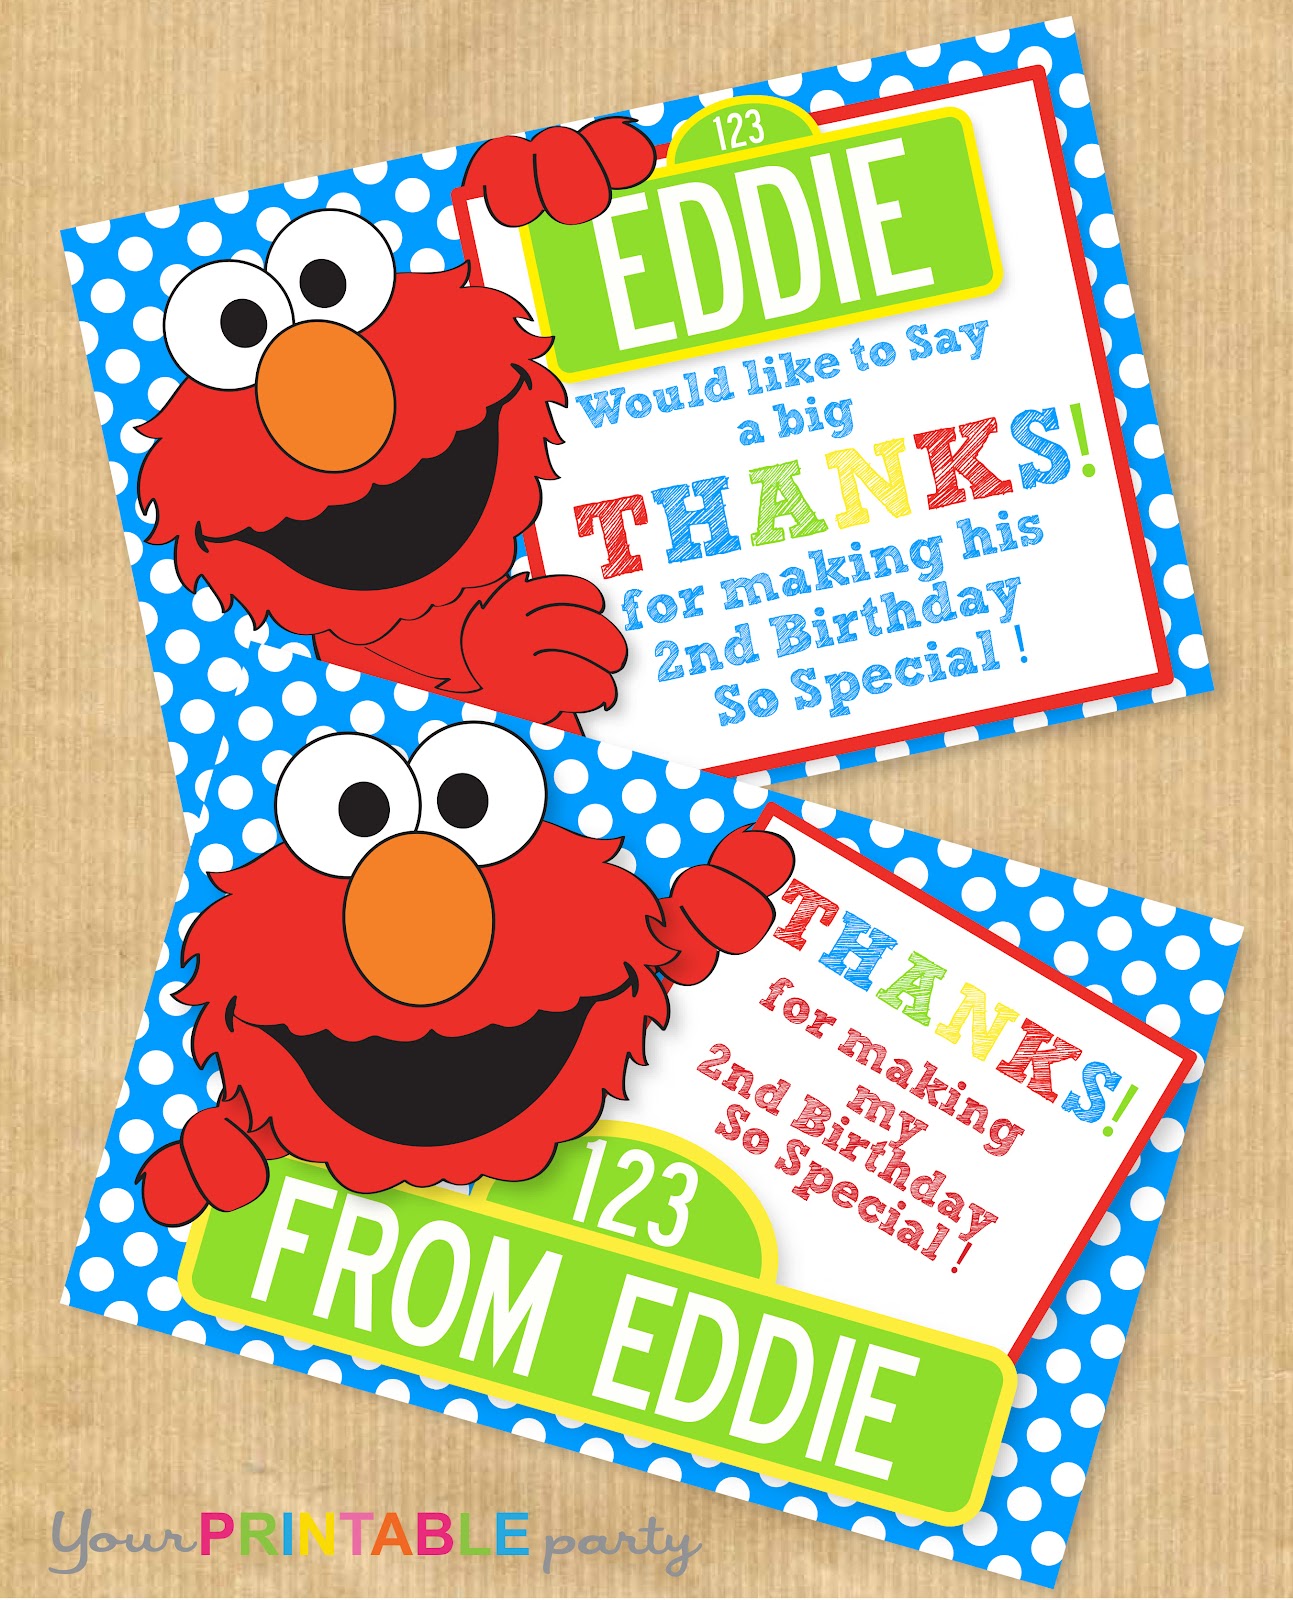 your-printable-party-new-sesame-street-inspired-thank-you-notes